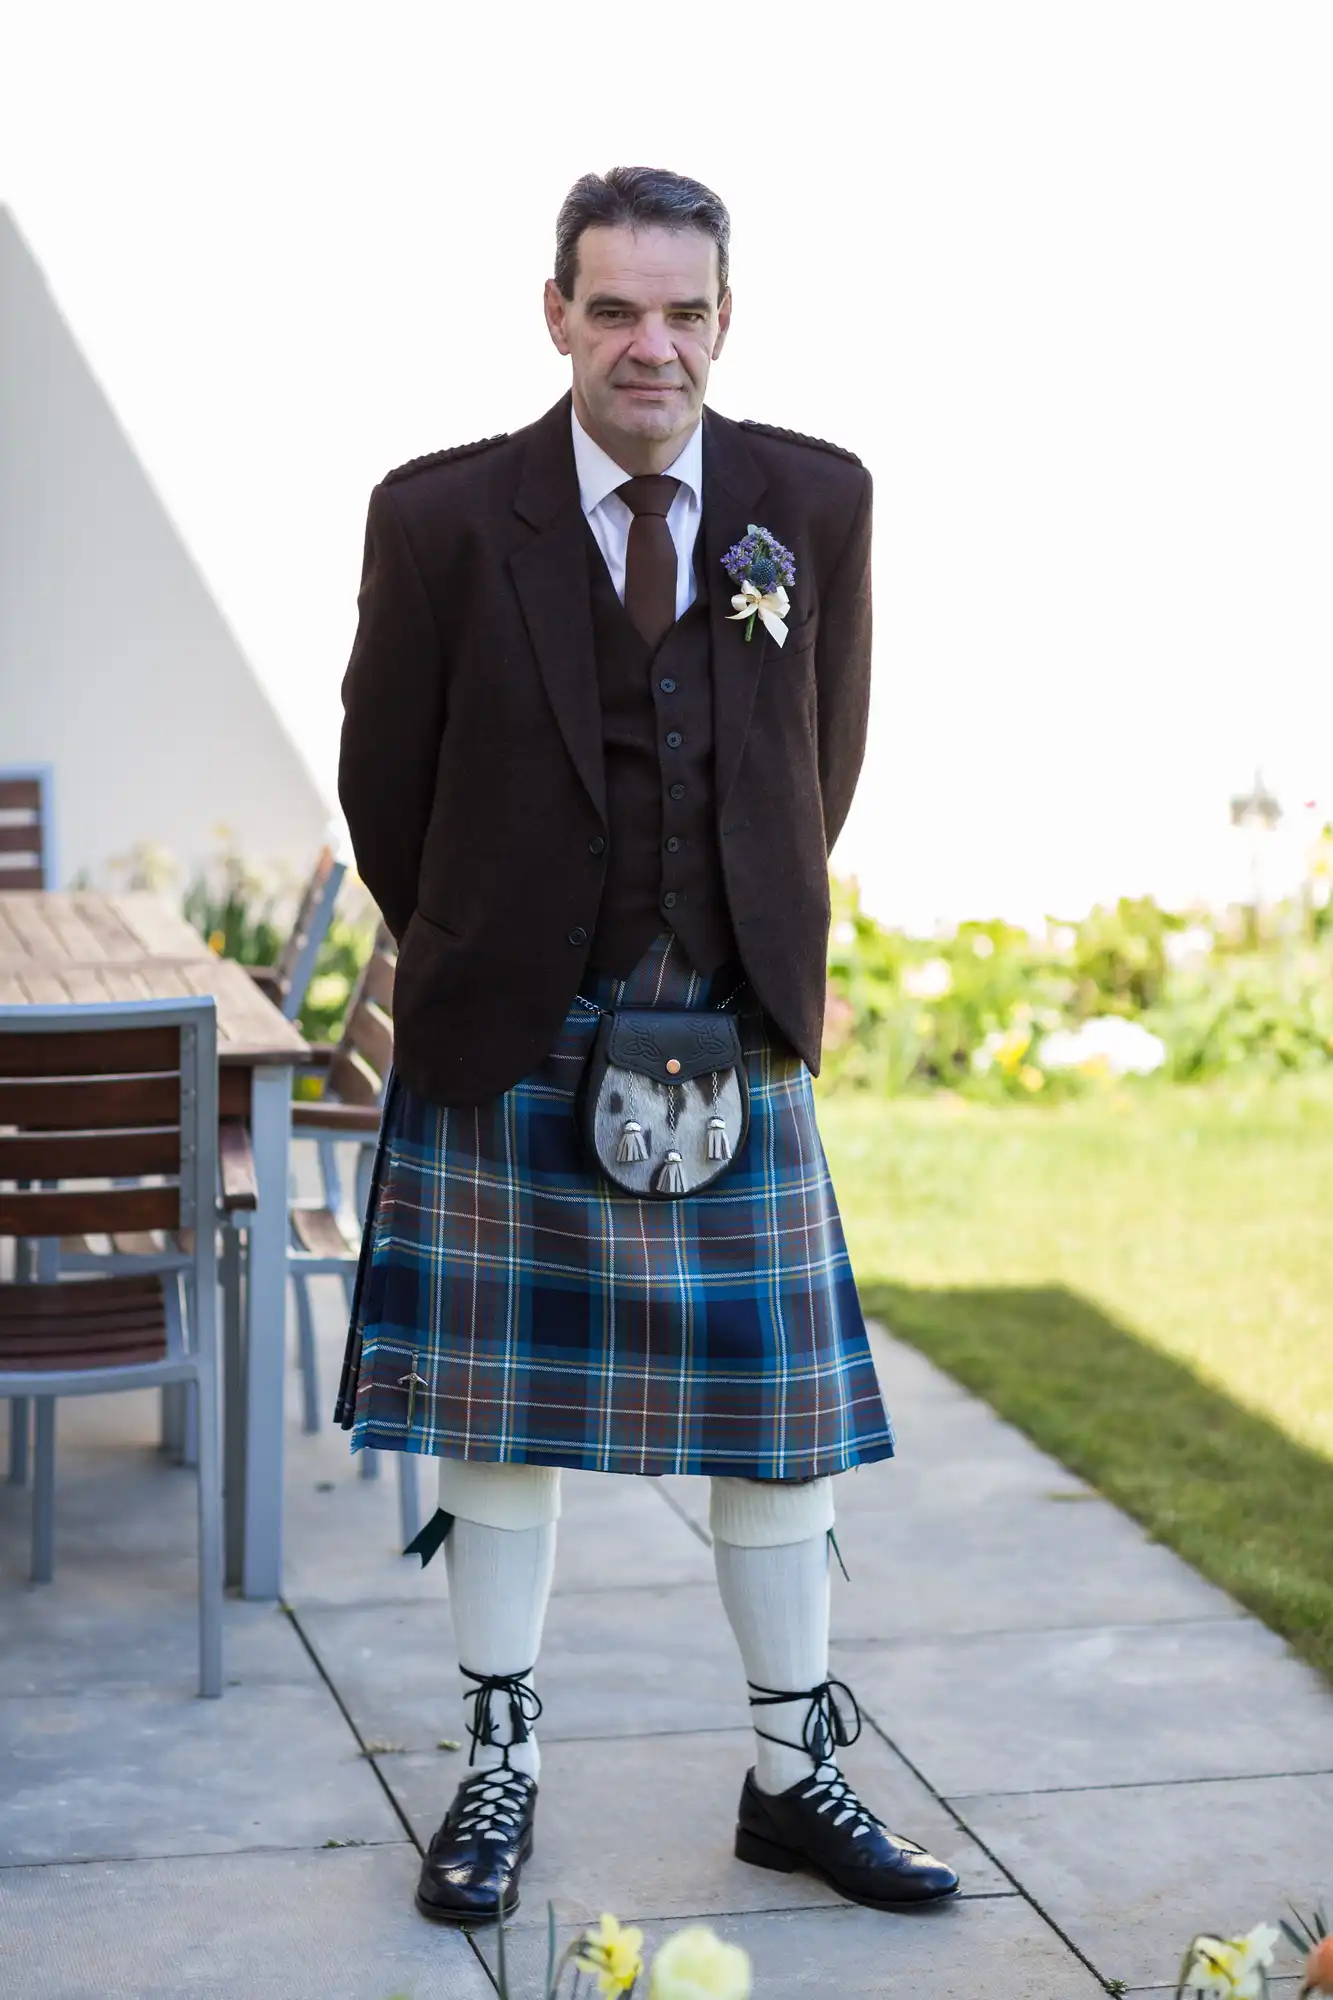 Man standing in a garden dressed in traditional scottish attire, including a tartan kilt, tweed jacket, and sporran.